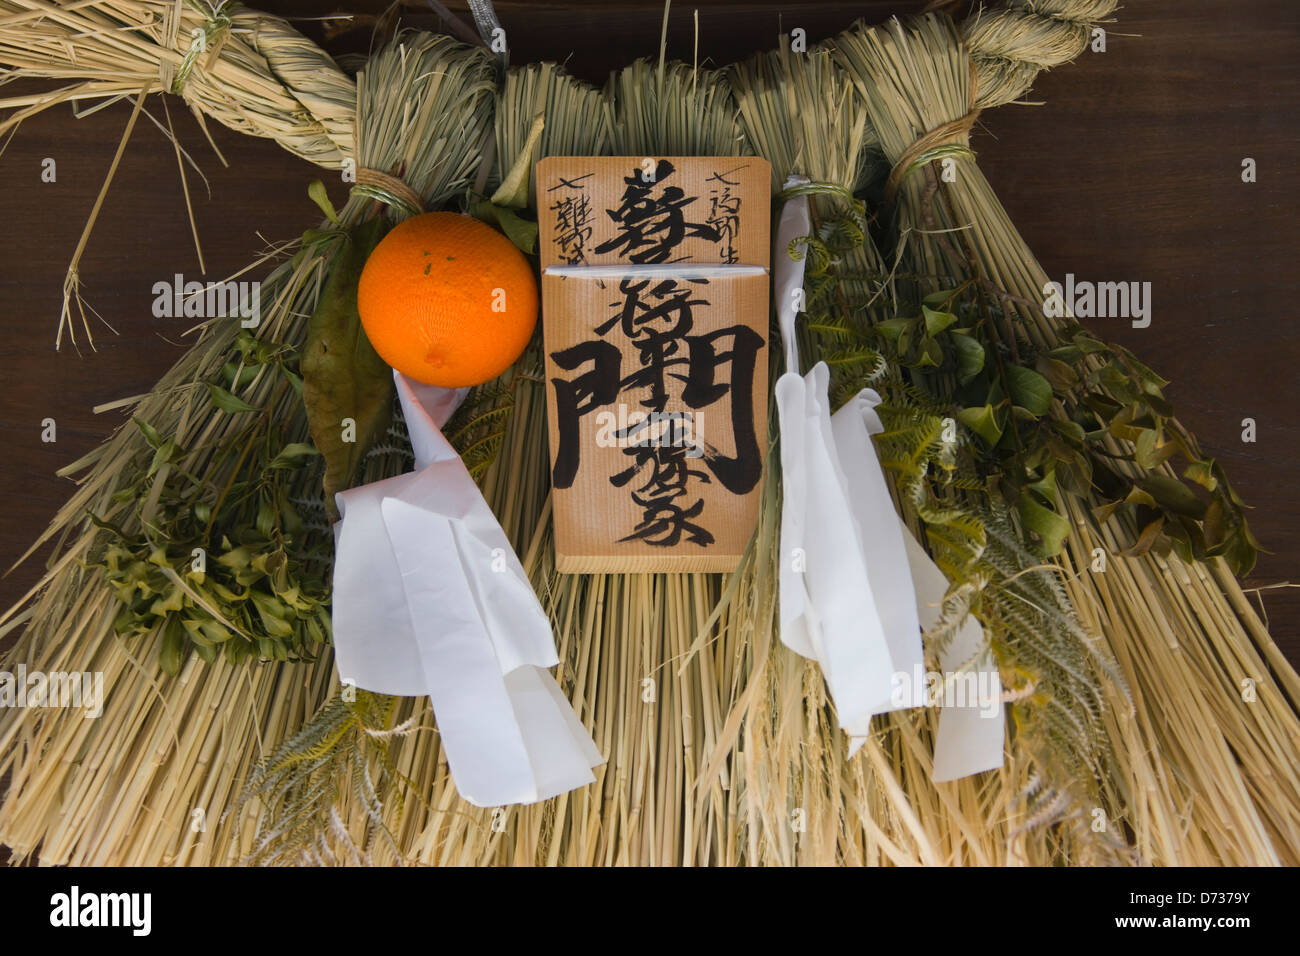 Rice straw coat decoration in an old house, Ise, Mie Prefecture, Japan Stock Photo